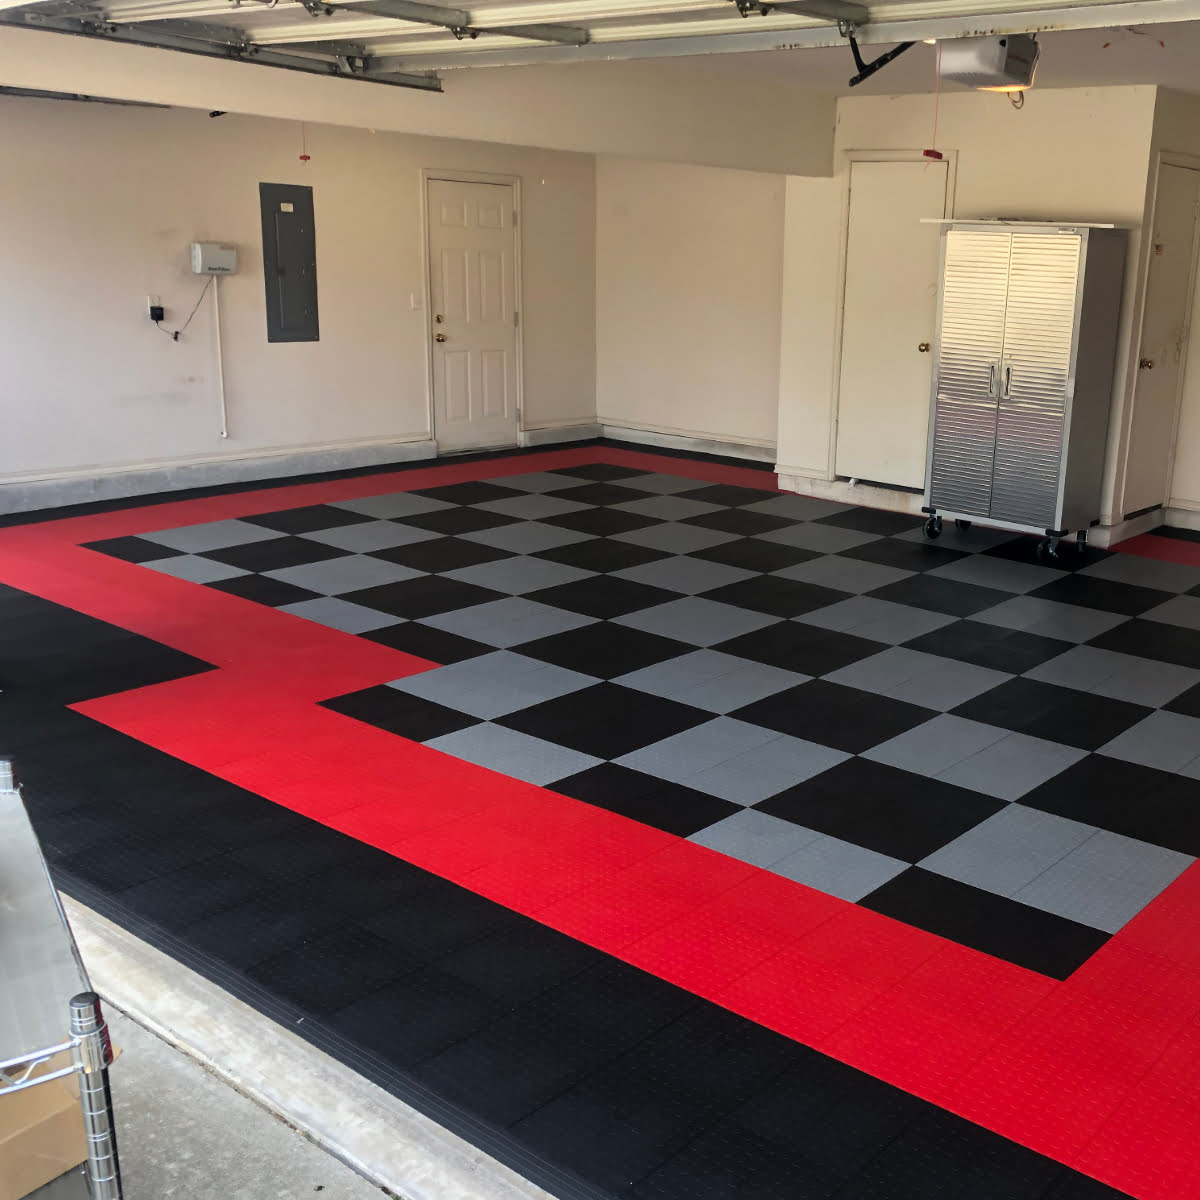 Garage makeover with Coin top black, gray, and red.